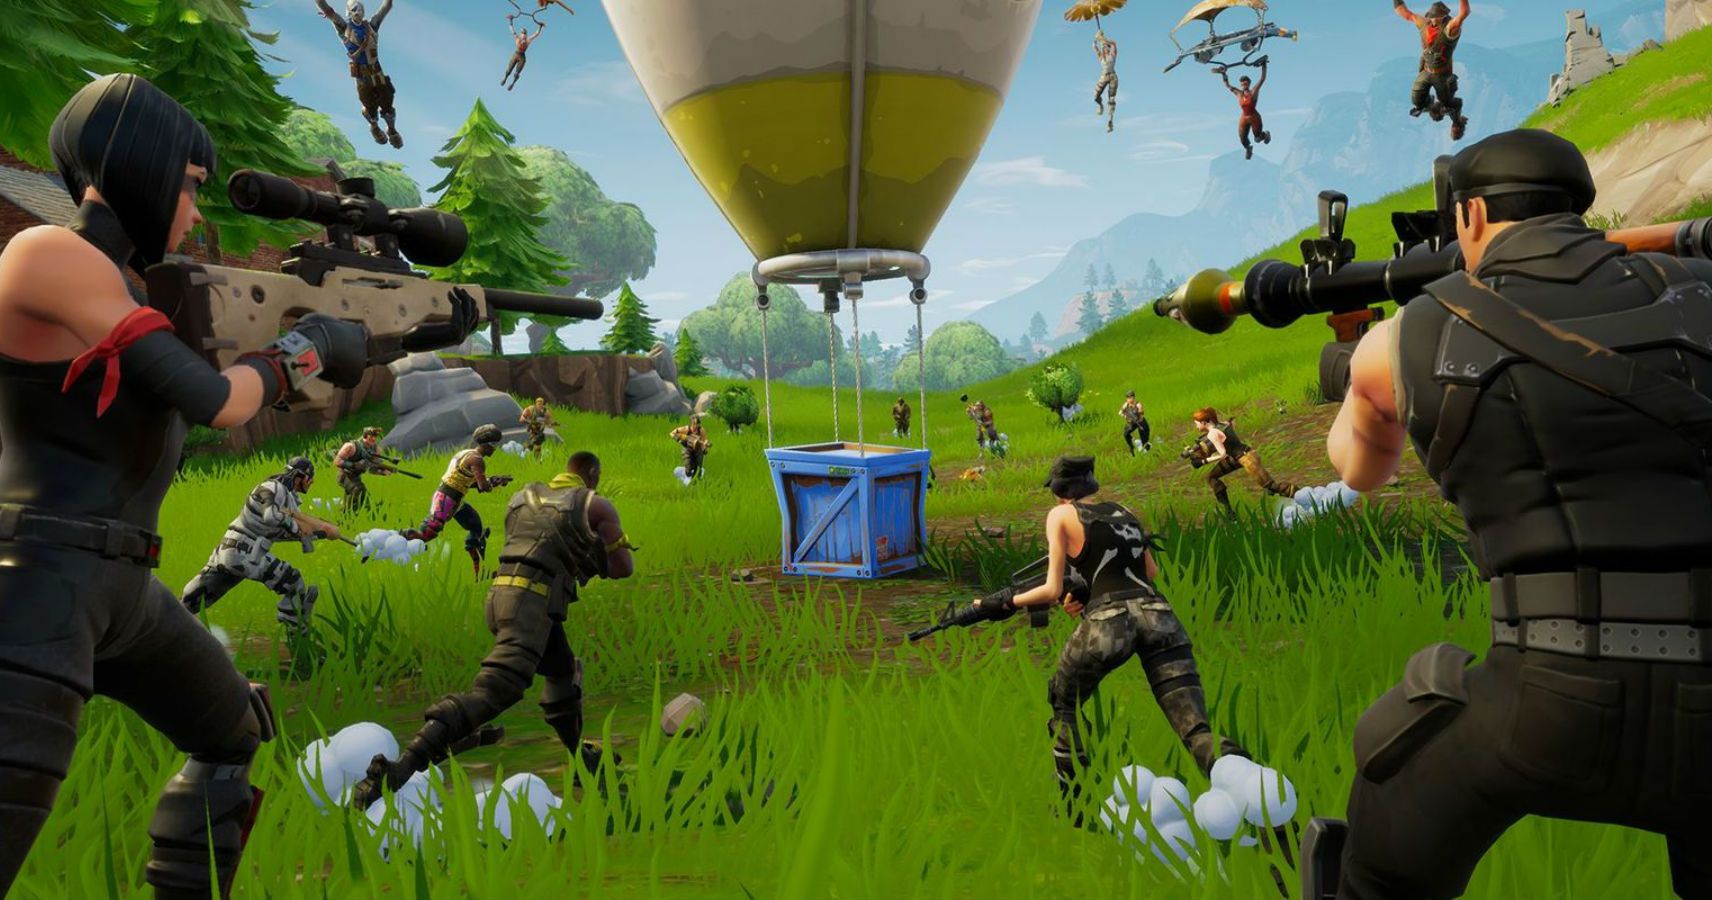 A Real Battle Royale Island Might Just Become A Reality